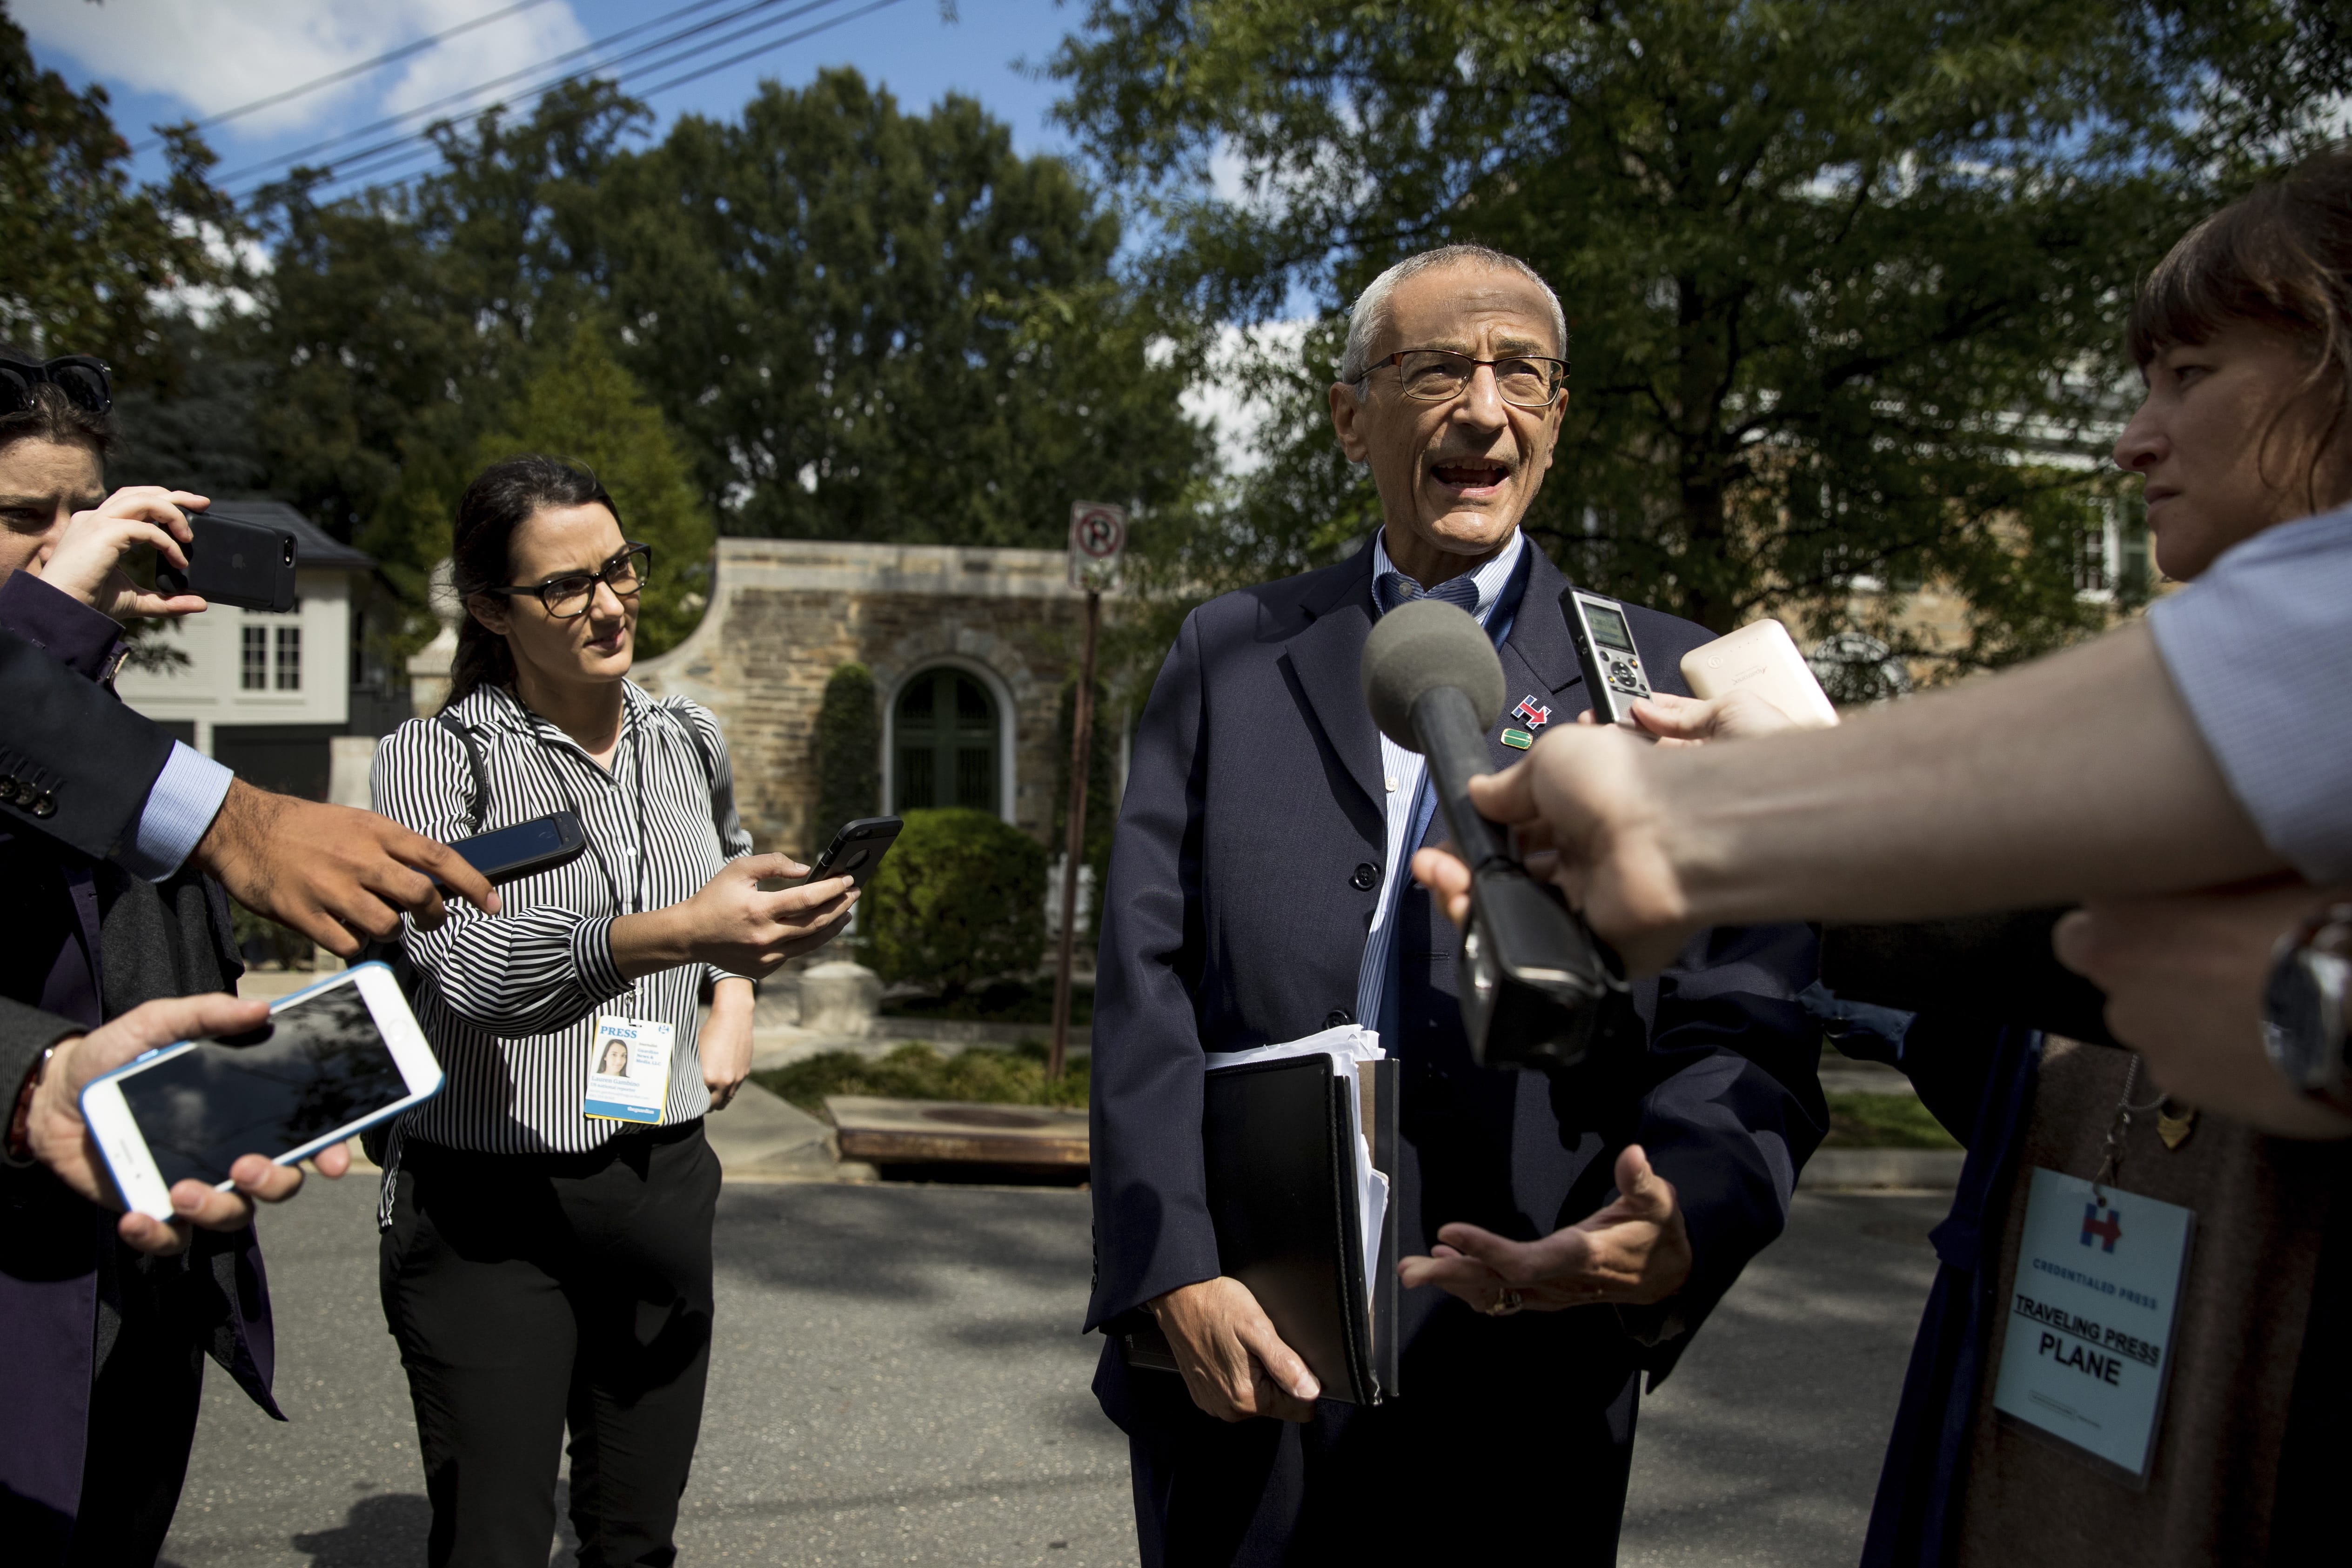 In this photo taken Oct. 5, 2016, Hillary Clinton's campaign manager John Podesta speaks to members of the media outside Democratic presidential candidate Hillary Clinton's home in Washington. Hacked emails show Hillary ClintonÄôs campaign wrestled with how to announce her opposition to construction of the controversial Keystone XL pipeline without losing the support of labor unions that supported to project. Emails published this week by WikiLeaks show debate and confusion within the Clinton camp as it faced down the unexpectedly strong primary challenge by liberal Sen. Bernie Sanders, who opposed the pipeline.